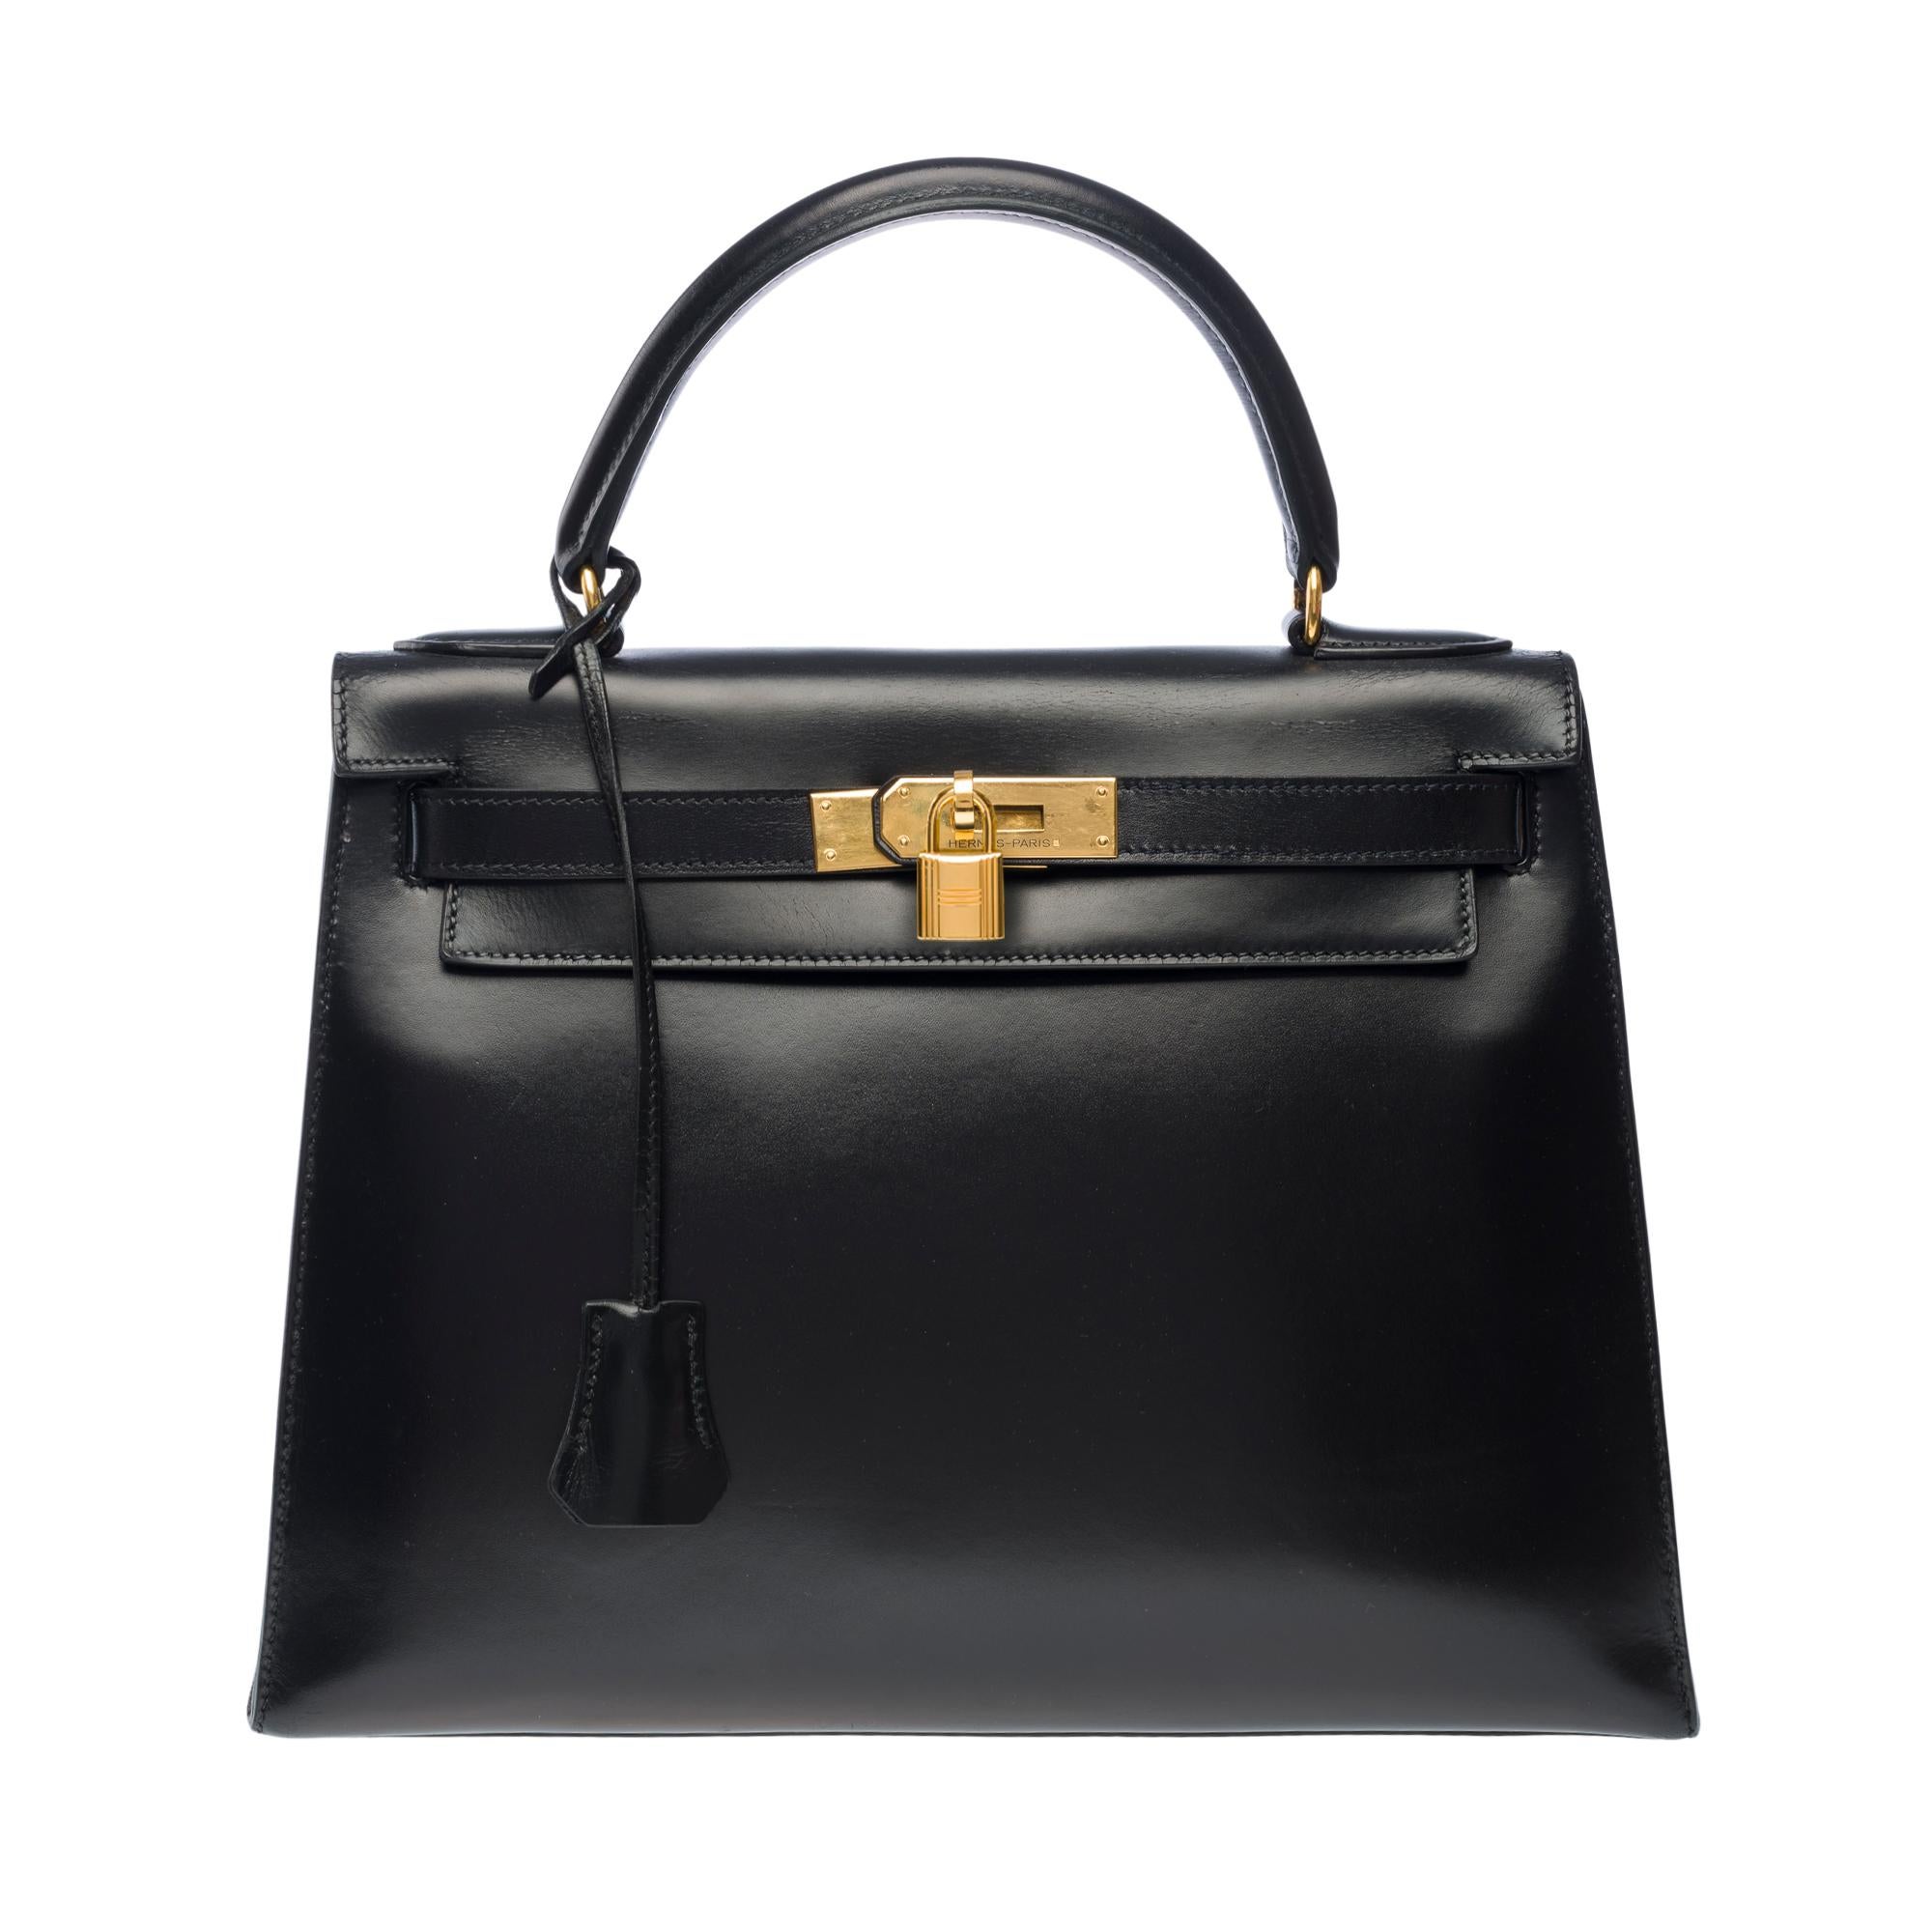 Superb​ ​Hermès​ ​Kelly​ ​28​ ​bag​ ​sellier​ ​in​ ​black​ ​box​ ​calf​ ​leather,​ ​​ ​​ ​gold​ ​plated​ ​metal​ ​trim,​ ​black​ ​leather​ ​box​ ​handle​ ​for​ ​hand​ ​carry

Flap​ ​closure
Black​ ​leather​ ​inner​ ​lining,​ ​​ ​​ ​one​ ​zippered​